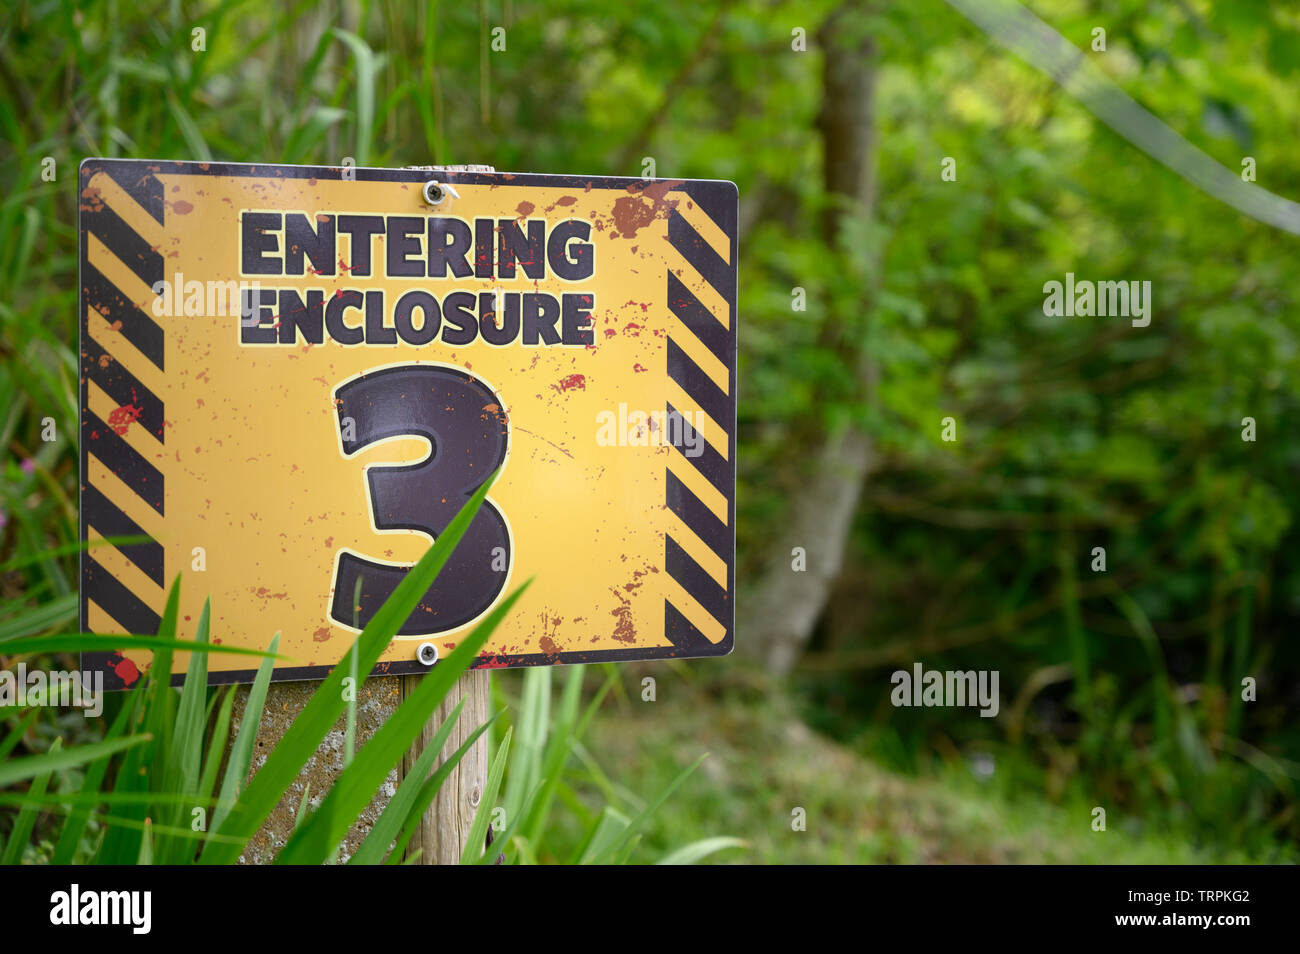 Entering enclosure three sign in theme park forest Stock Photo